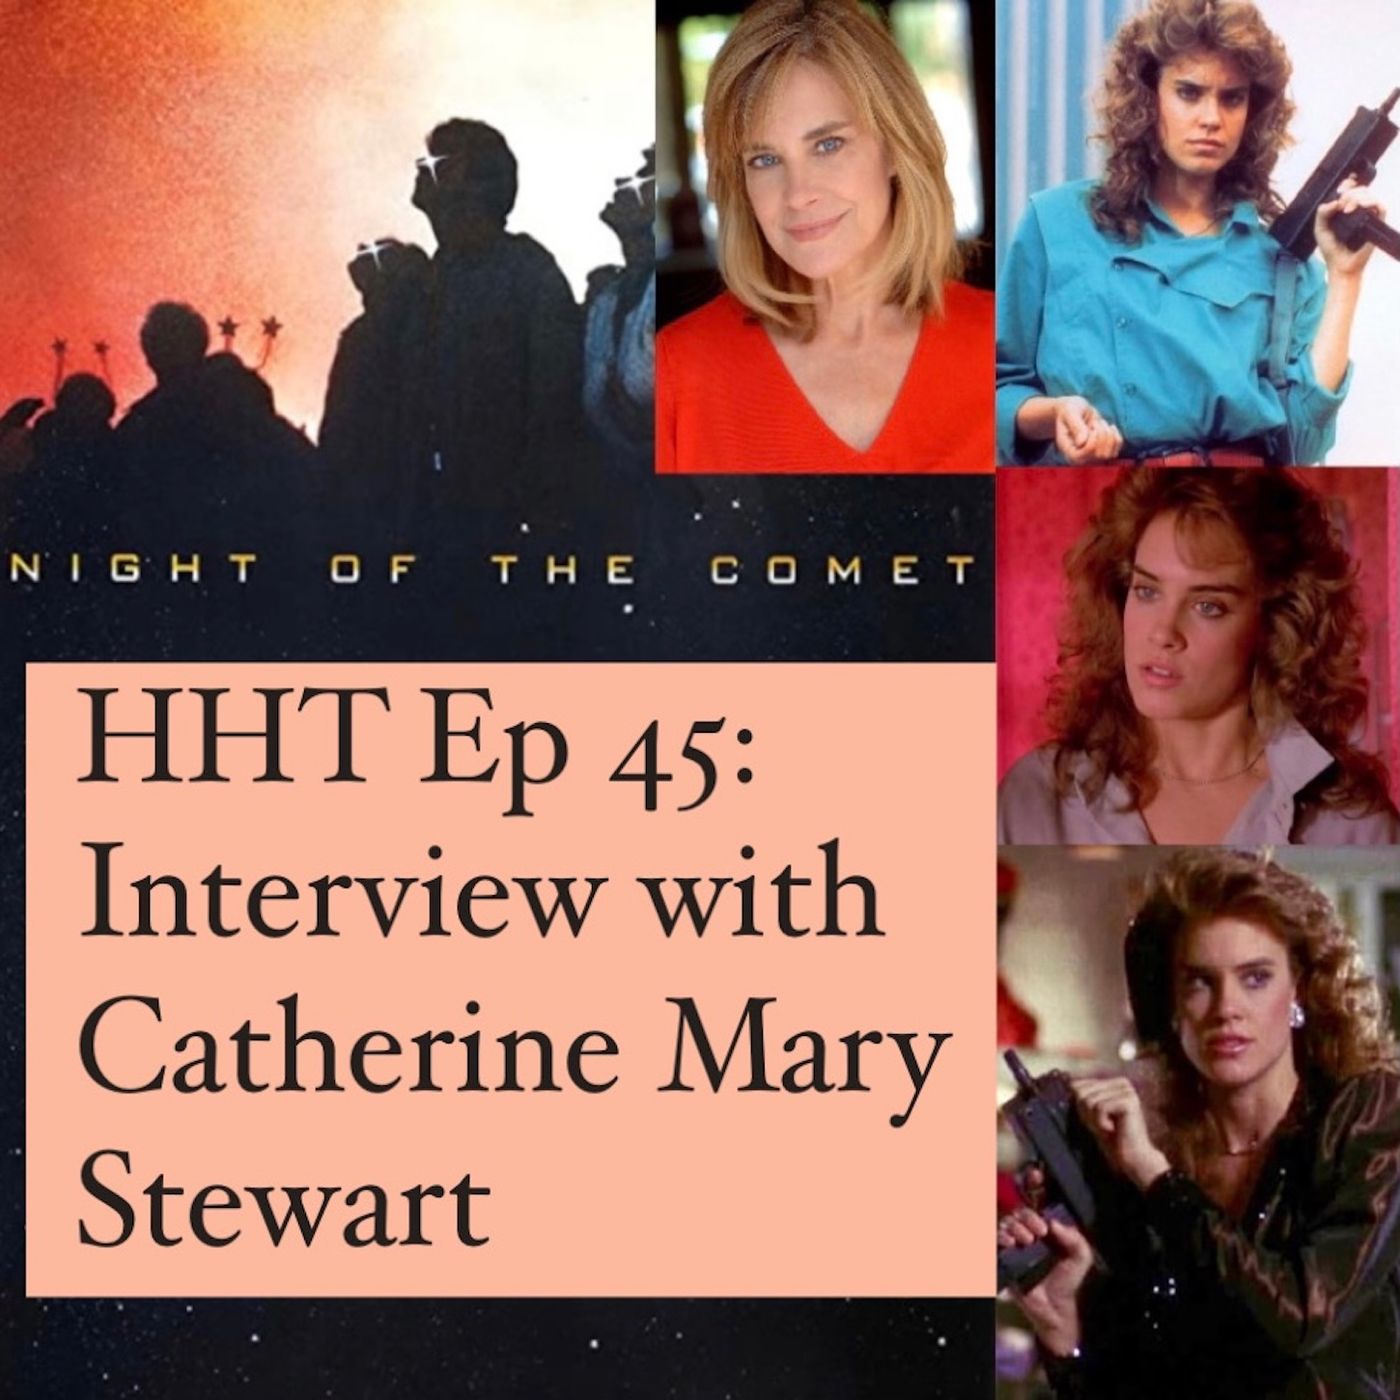 Ep 45: Interview w/Catherine Mary Stewart from "Night of the Comet" Image